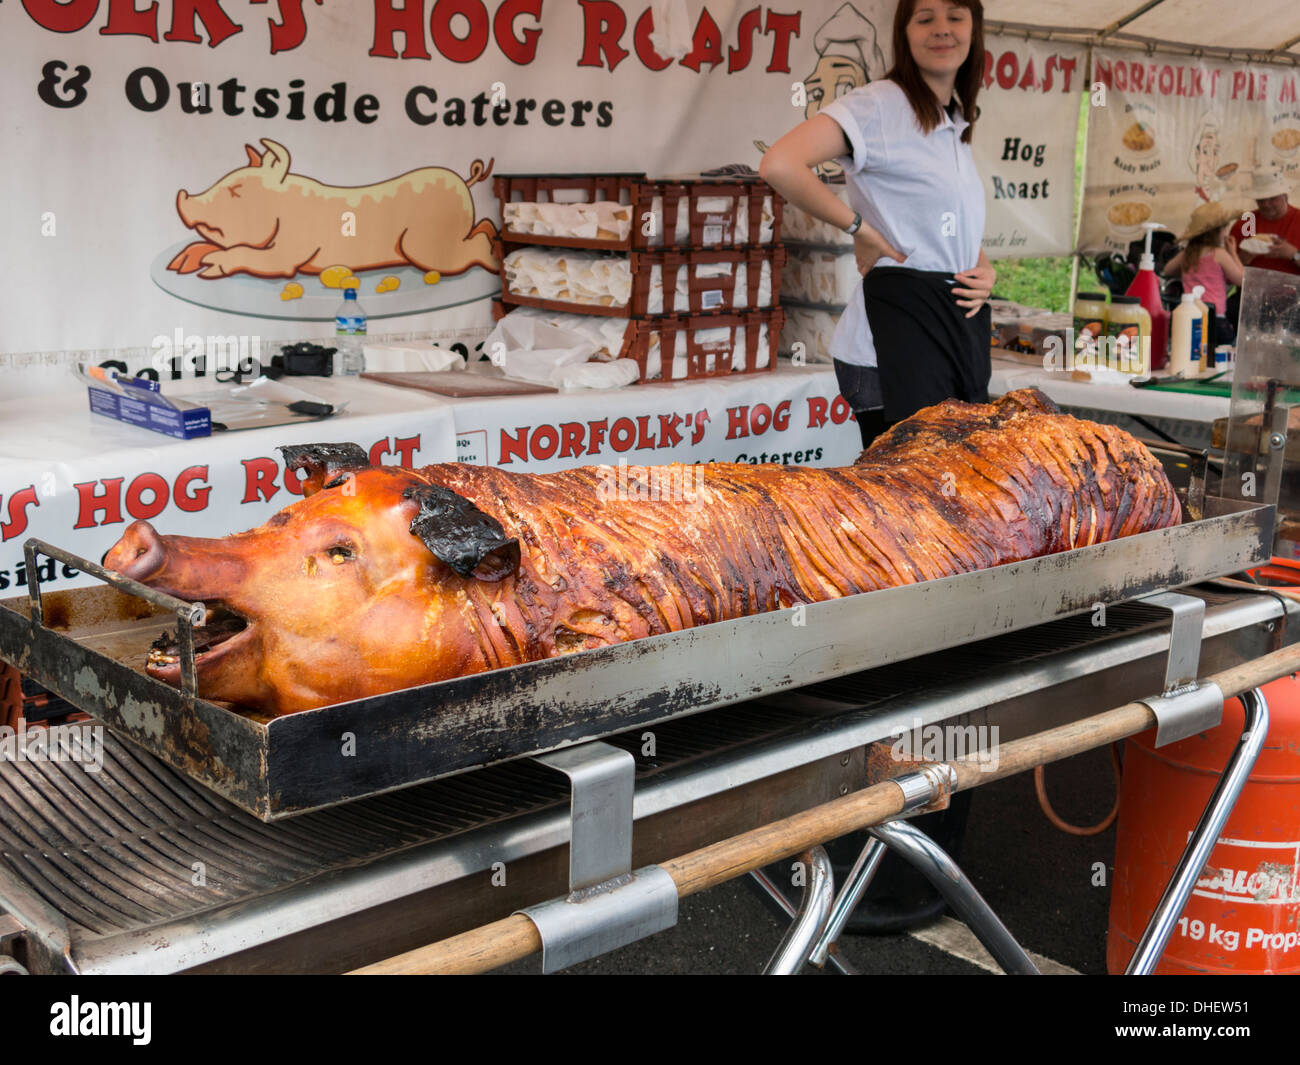 Hog roast pig stall on open air market with girl standing in background Stock Photo